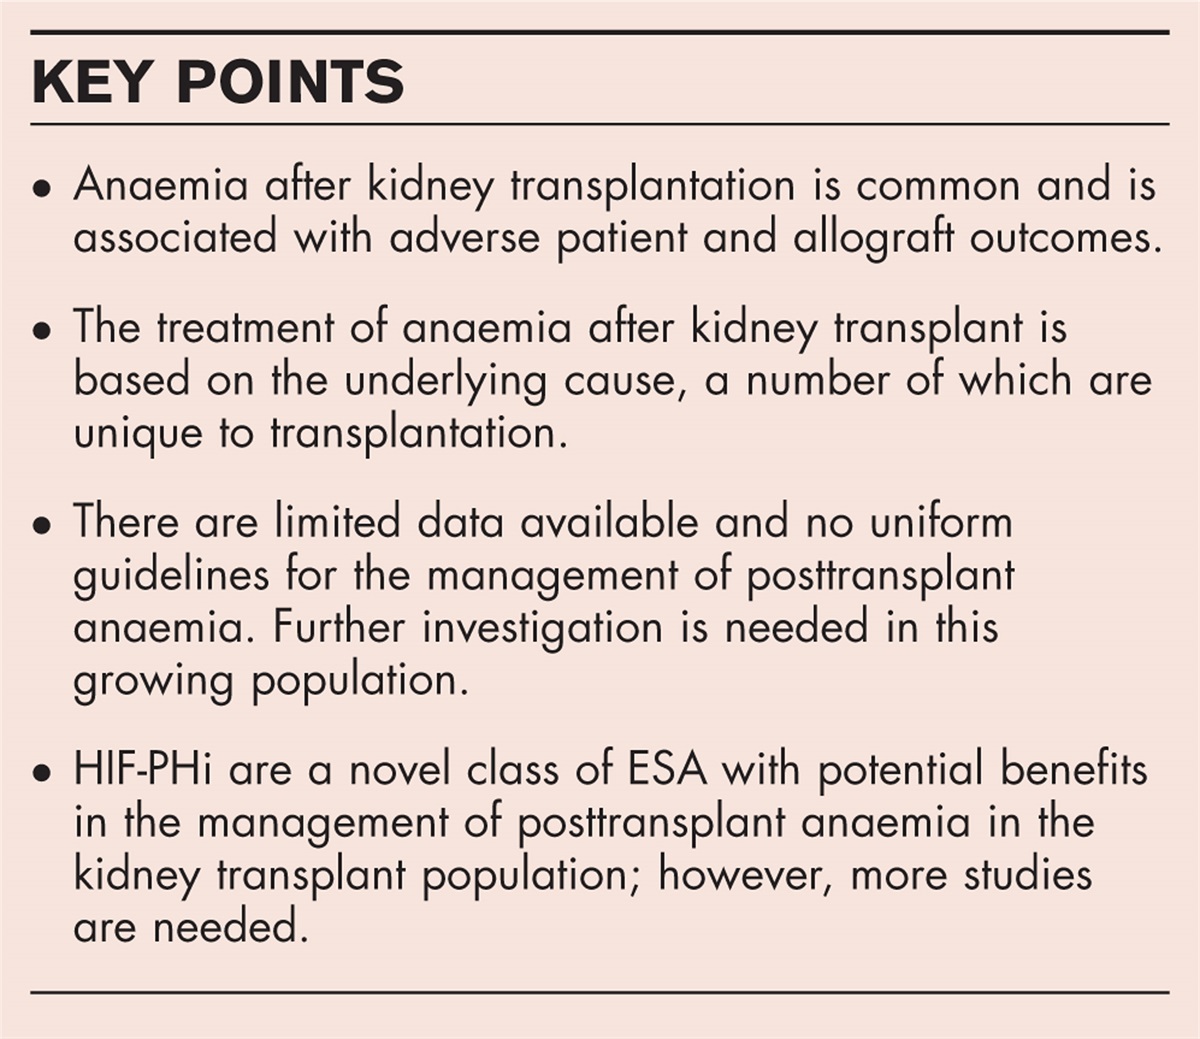 The current therapeutic approach for anaemia after kidney transplant